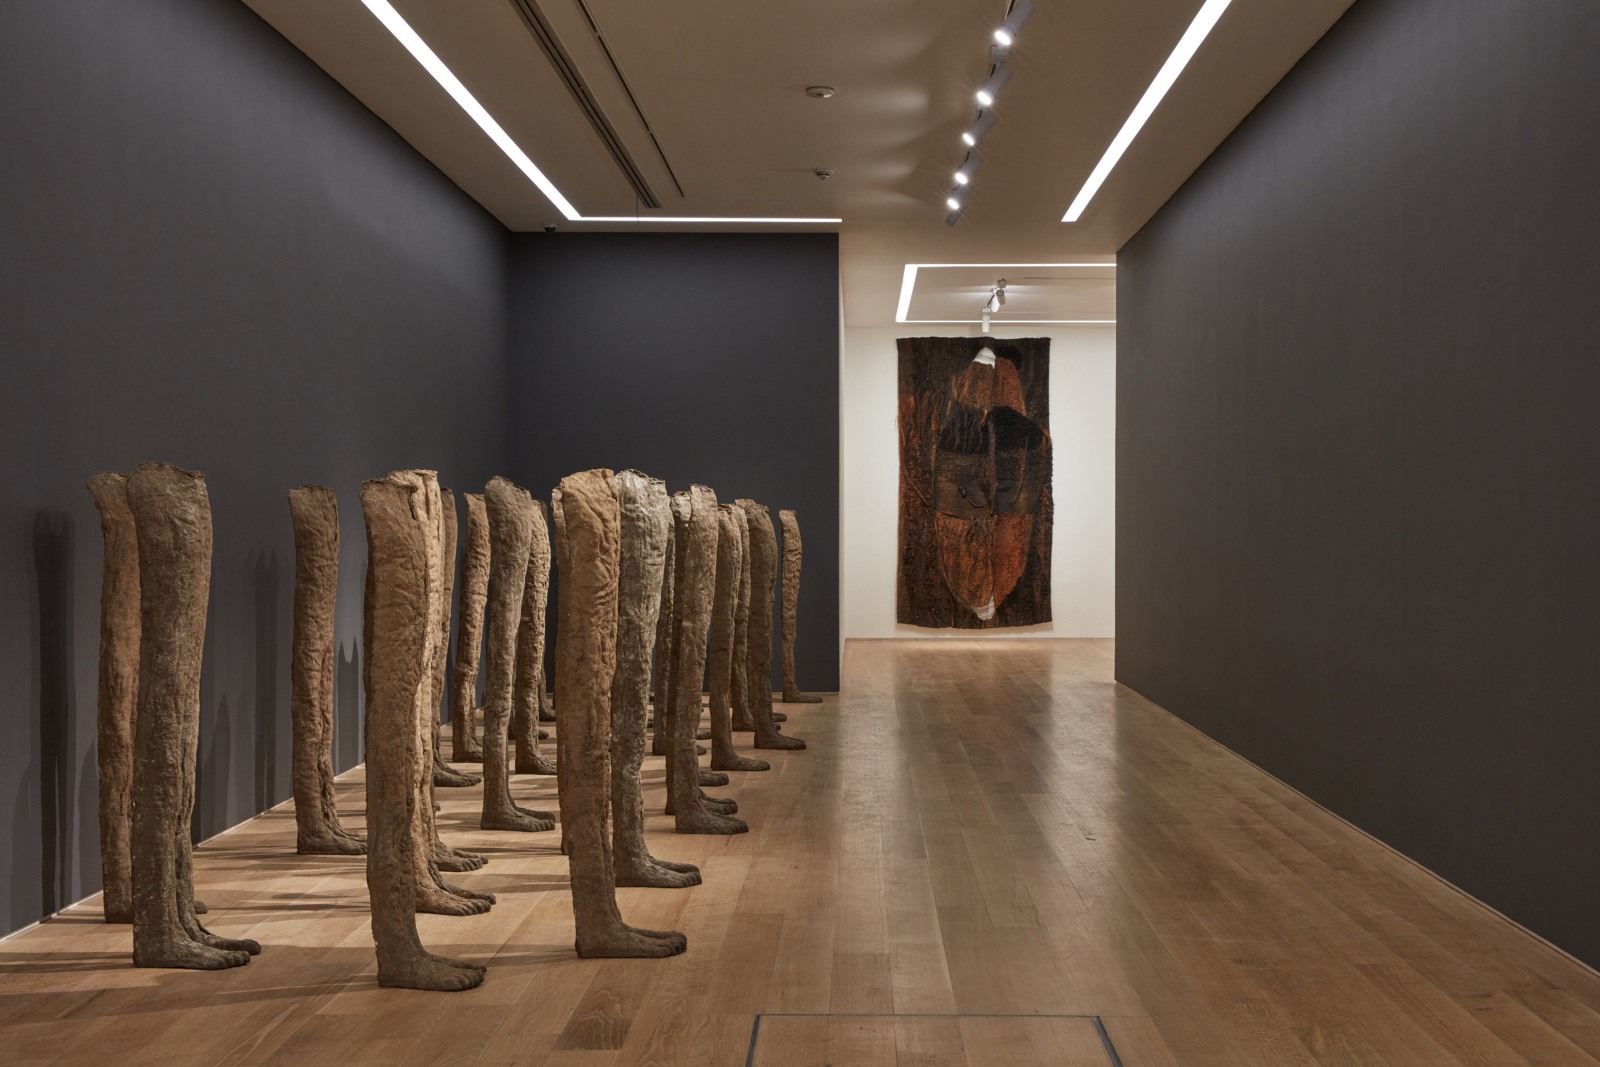 Installation view of burlap and resin sculptures and a textile work by Magdalena Abakanowicz